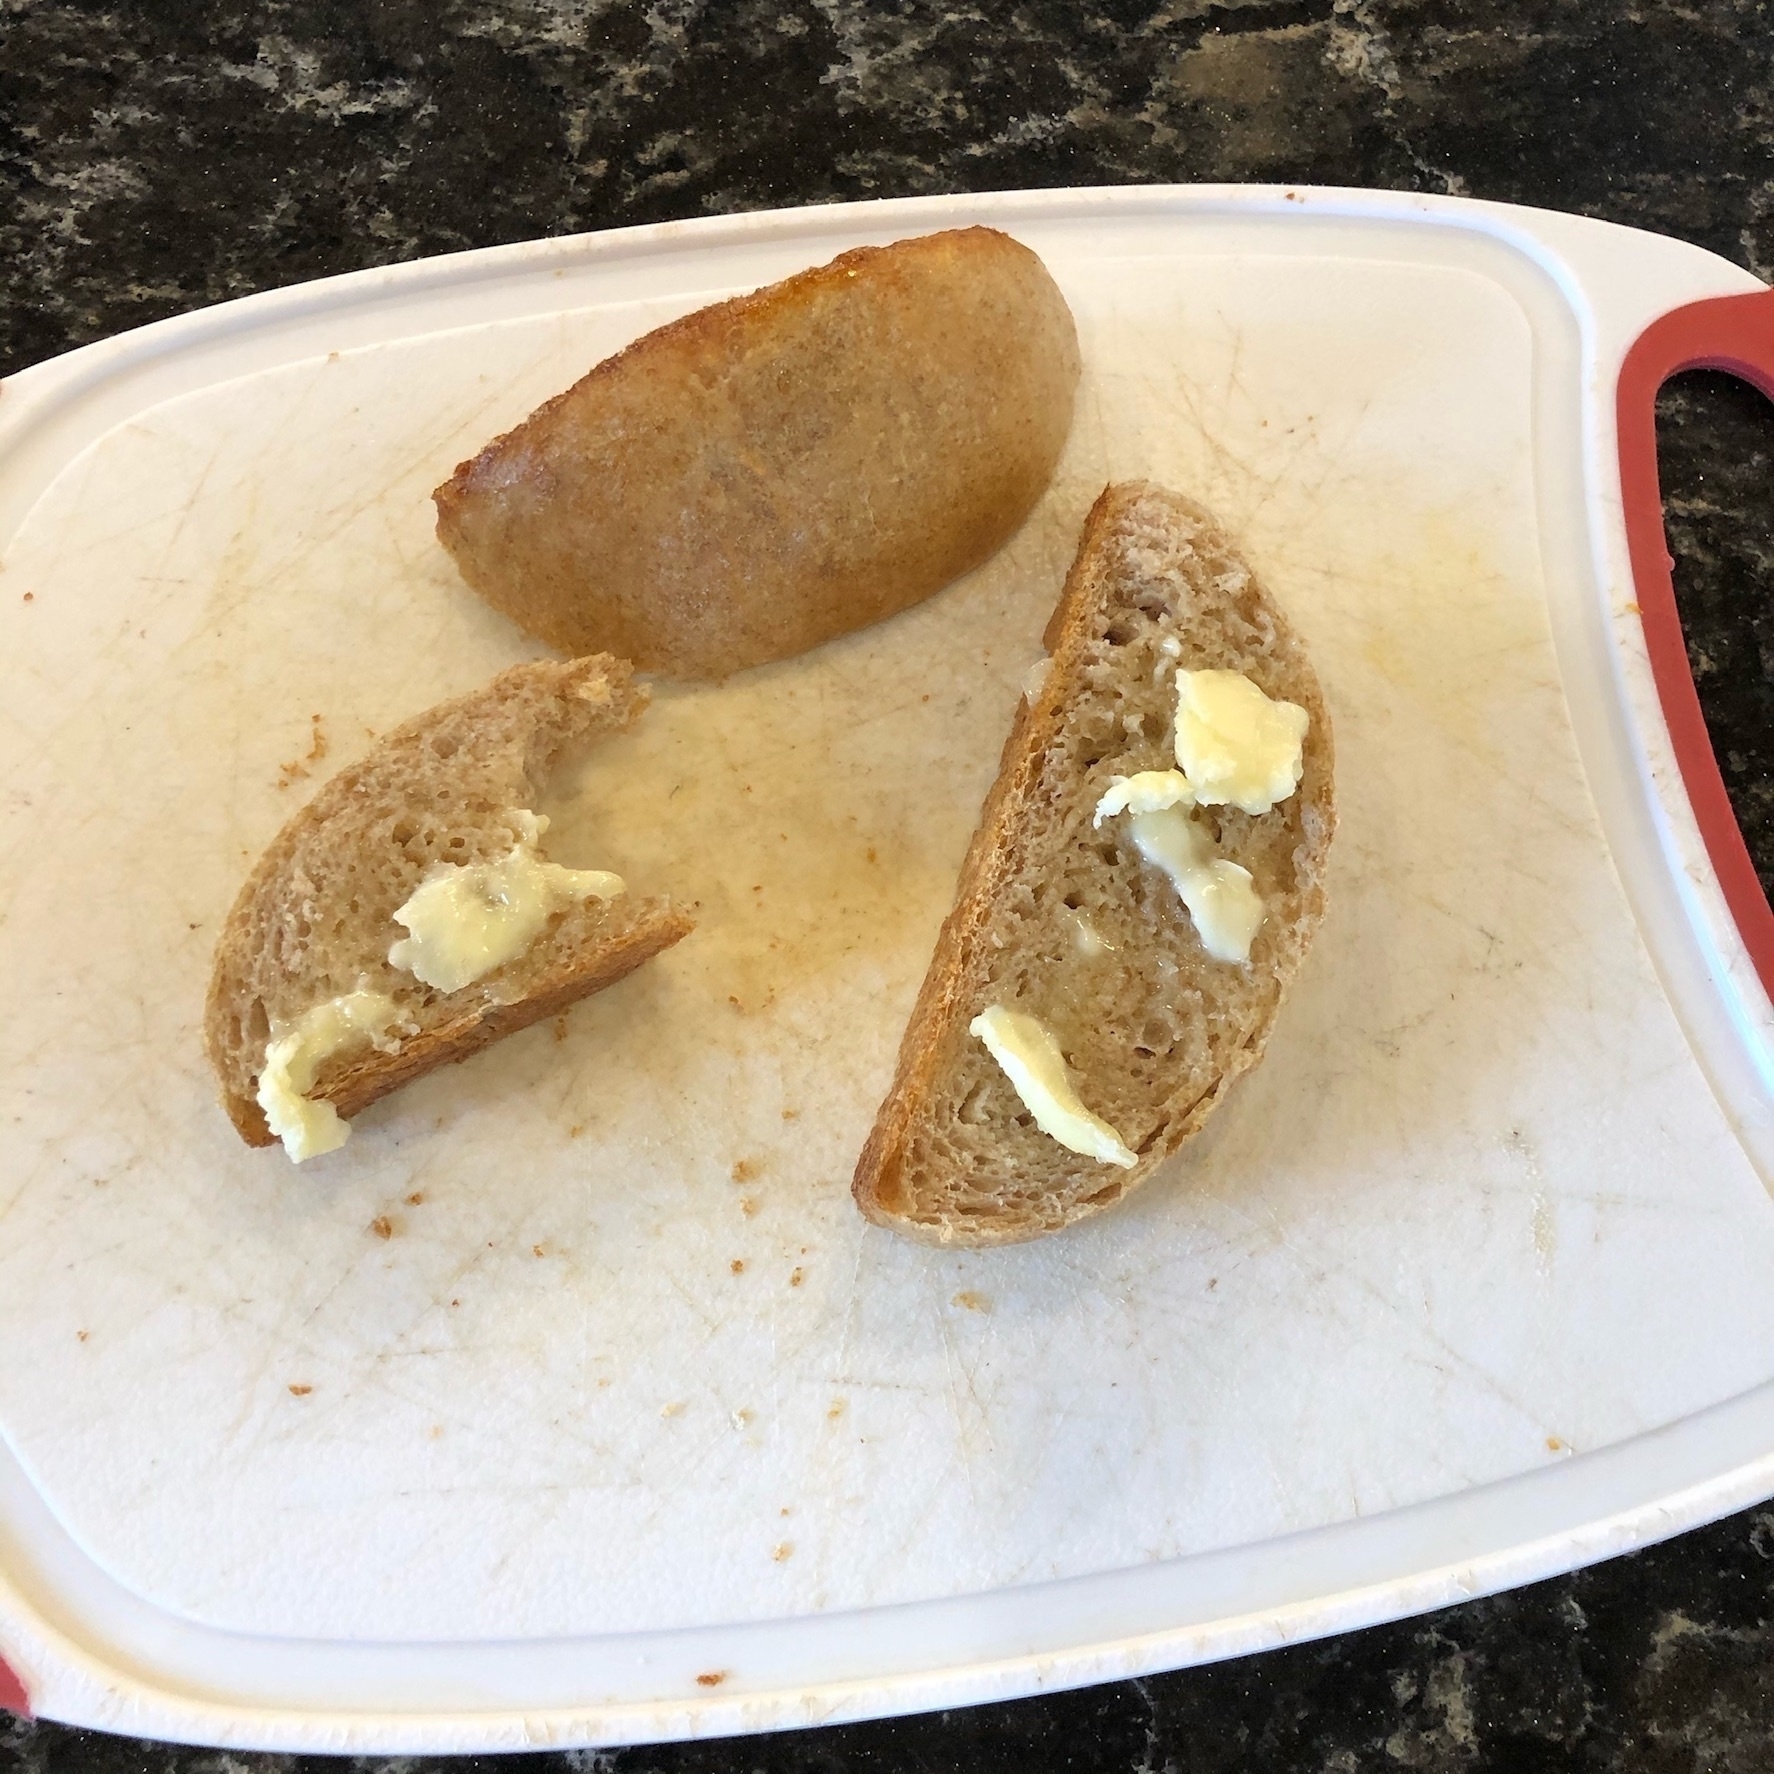 Three small slices of bread with pads of butter on top, sitting on a white cutting board